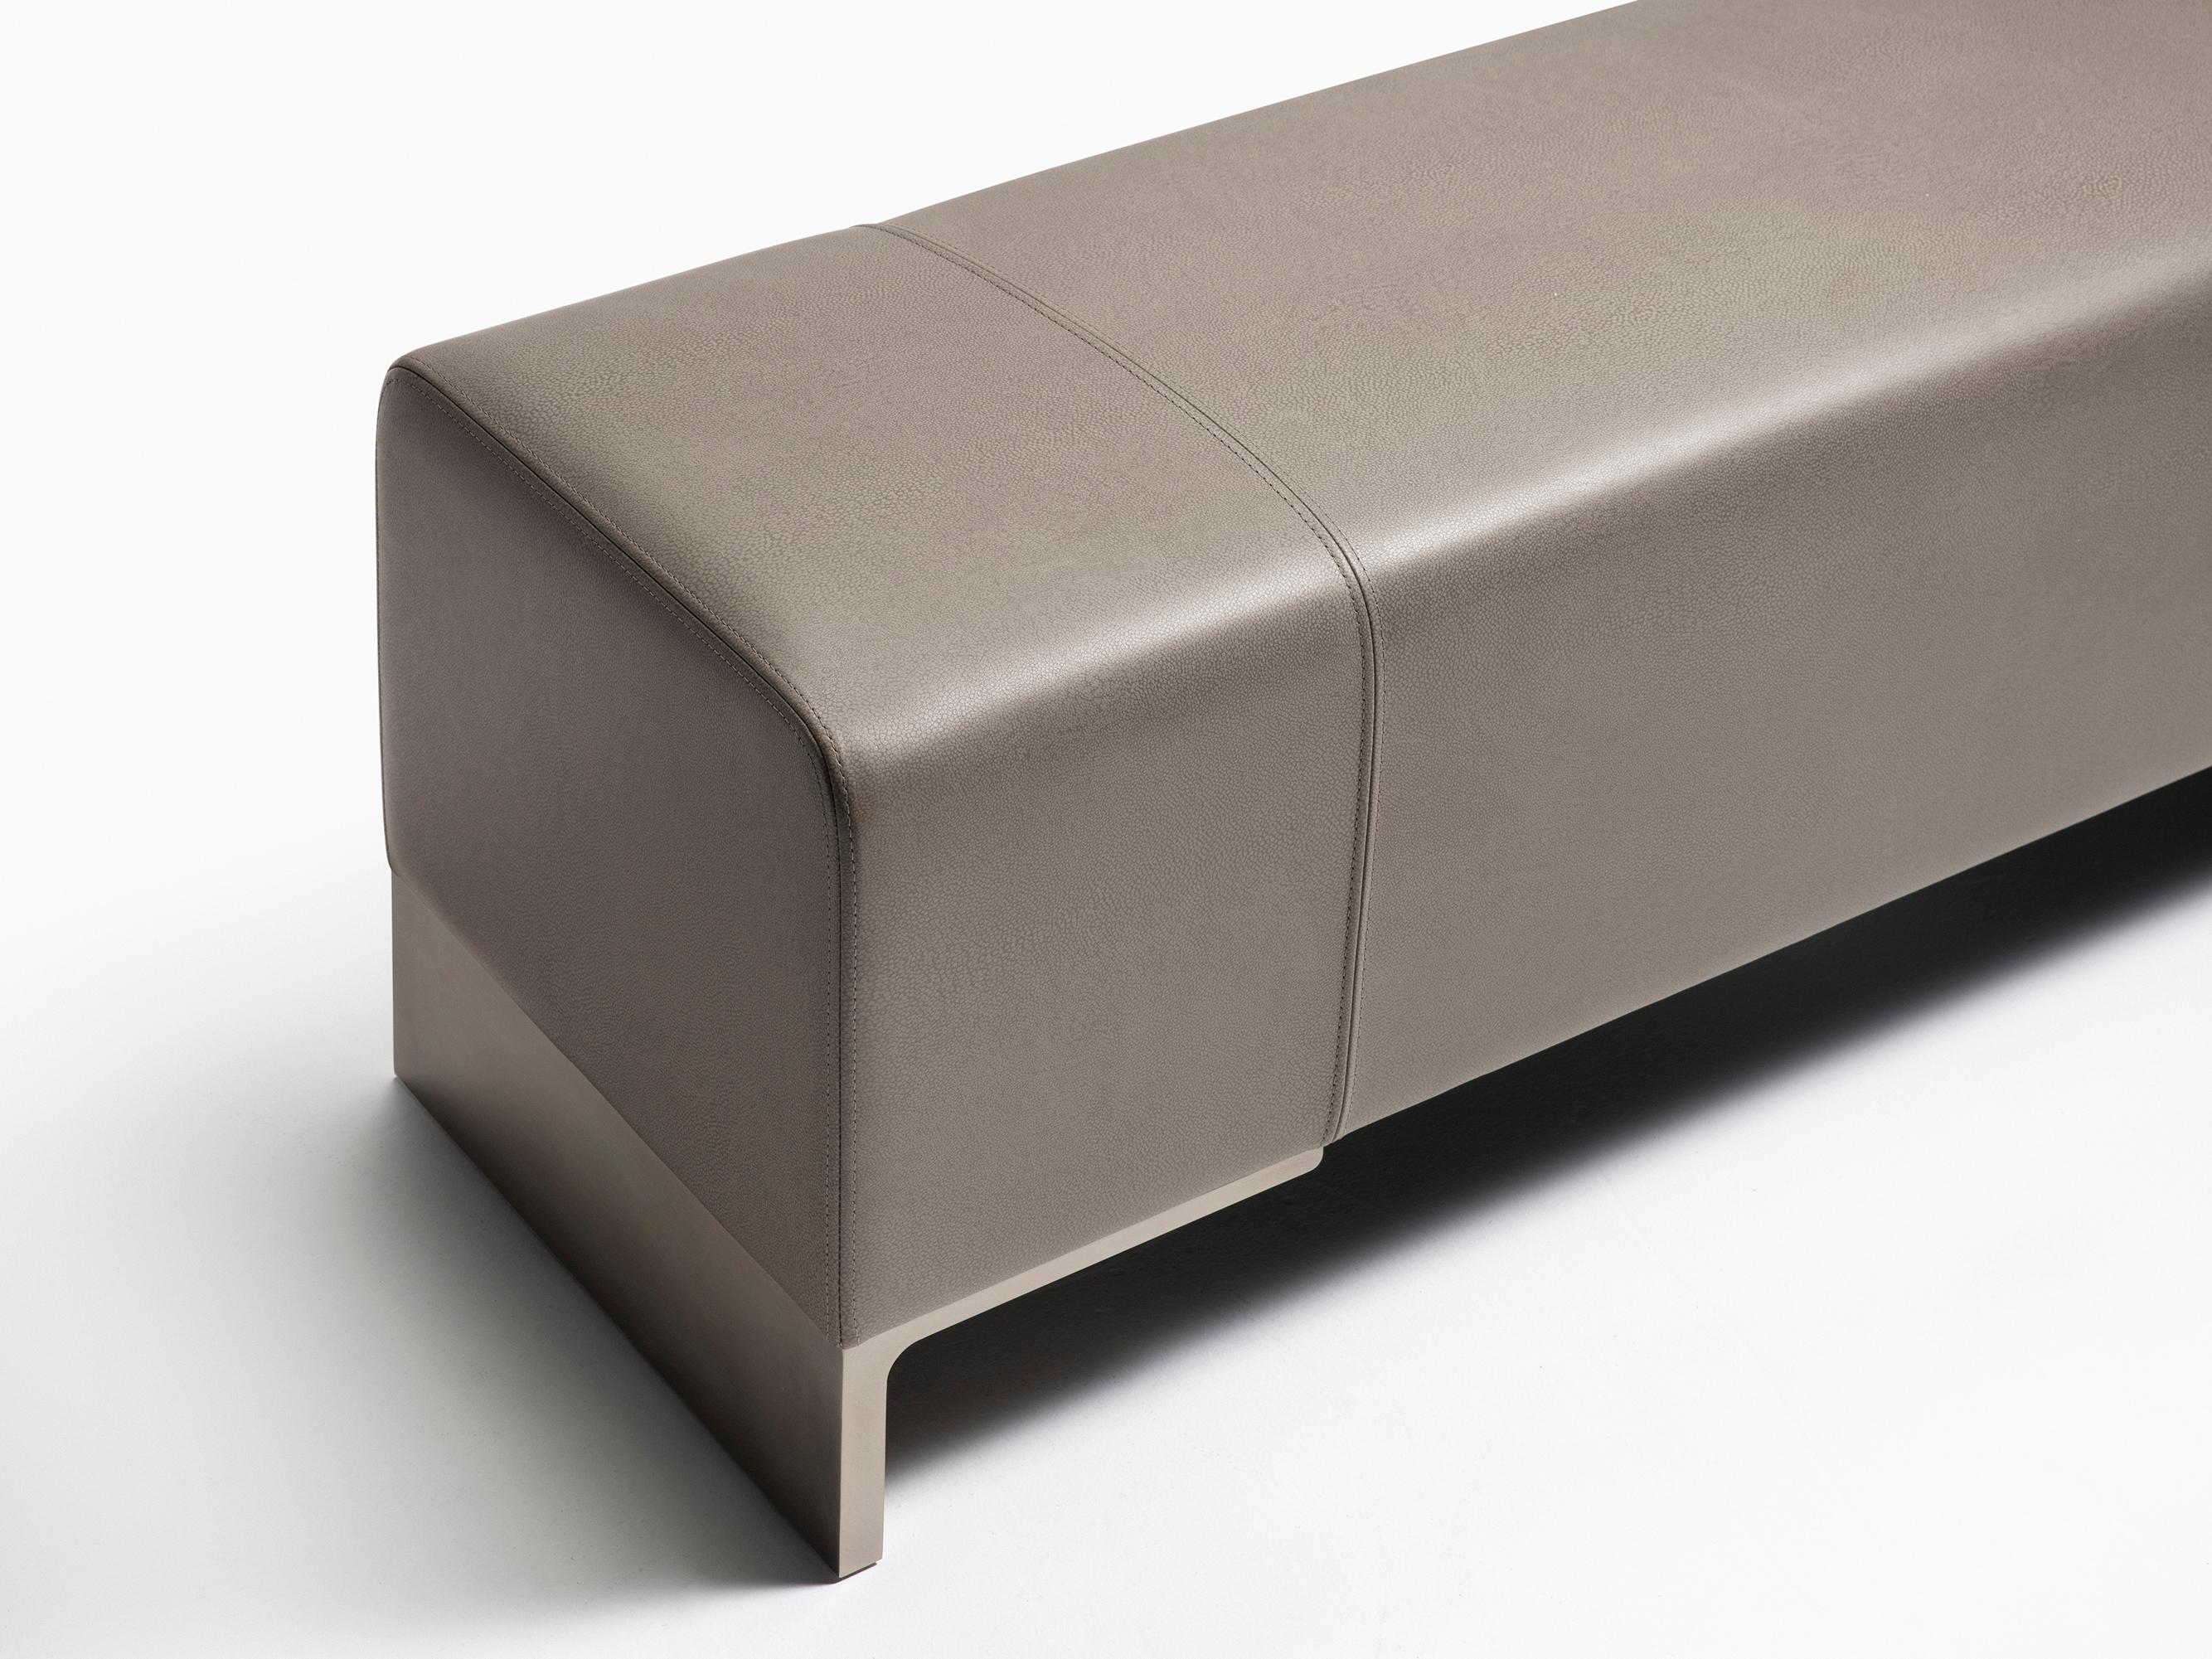 HOLLY HUNT Arakan bench in silver smoke and terra leather. A voluminous bench that brings gravity and softness to any room, ideal at the foot of the bed. Beautiful and modern with a gorgeous brushed metal base. Upholstered in our delicious HOLLY